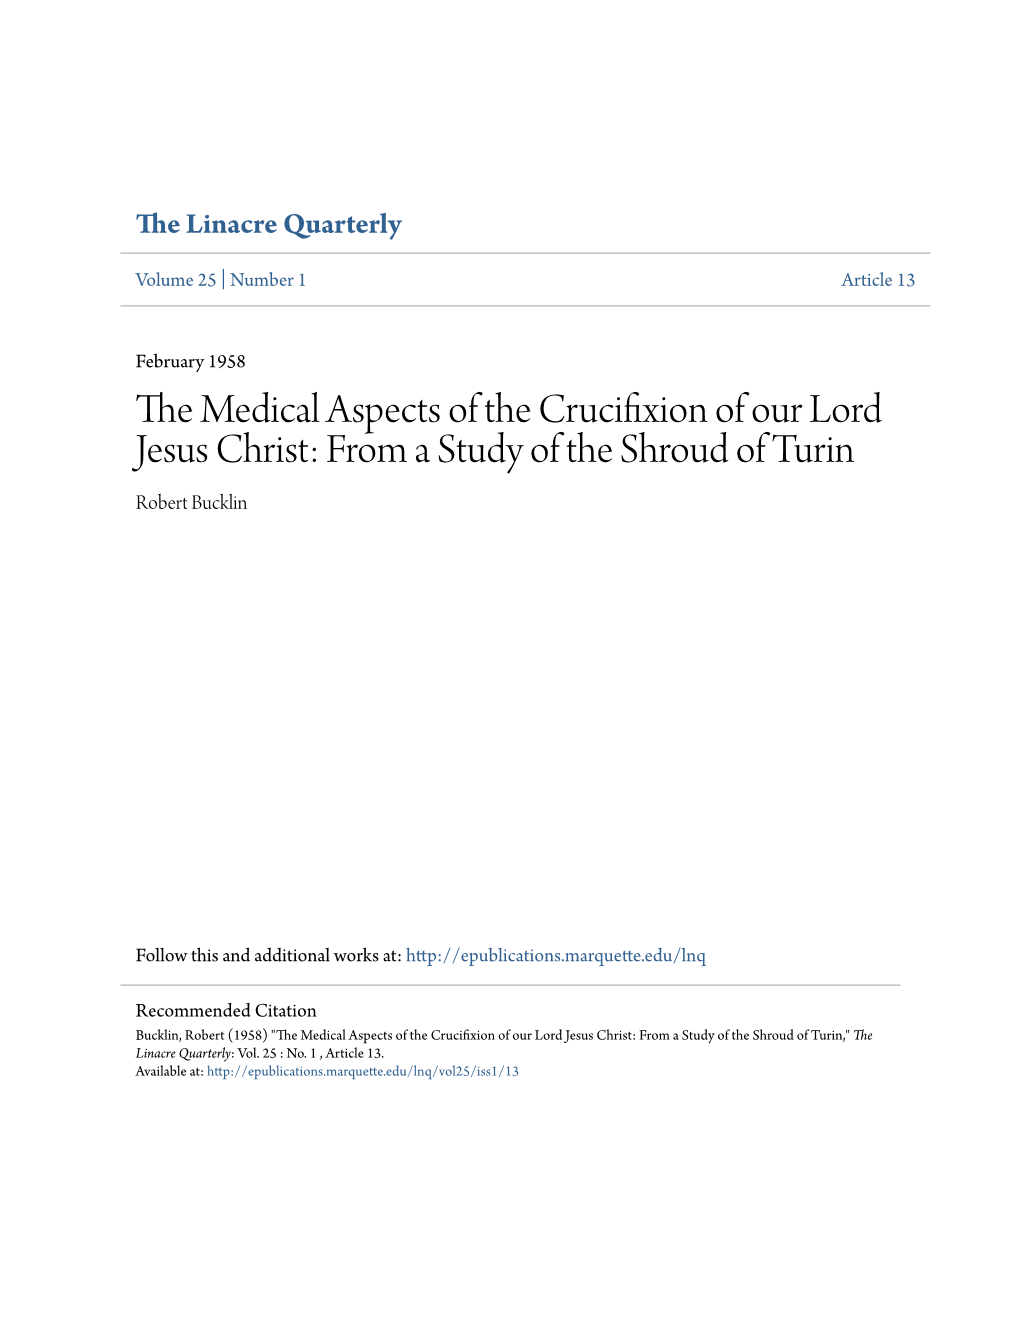 The Medical Aspects of the Crucifixion of Our Lord Jesus Christ